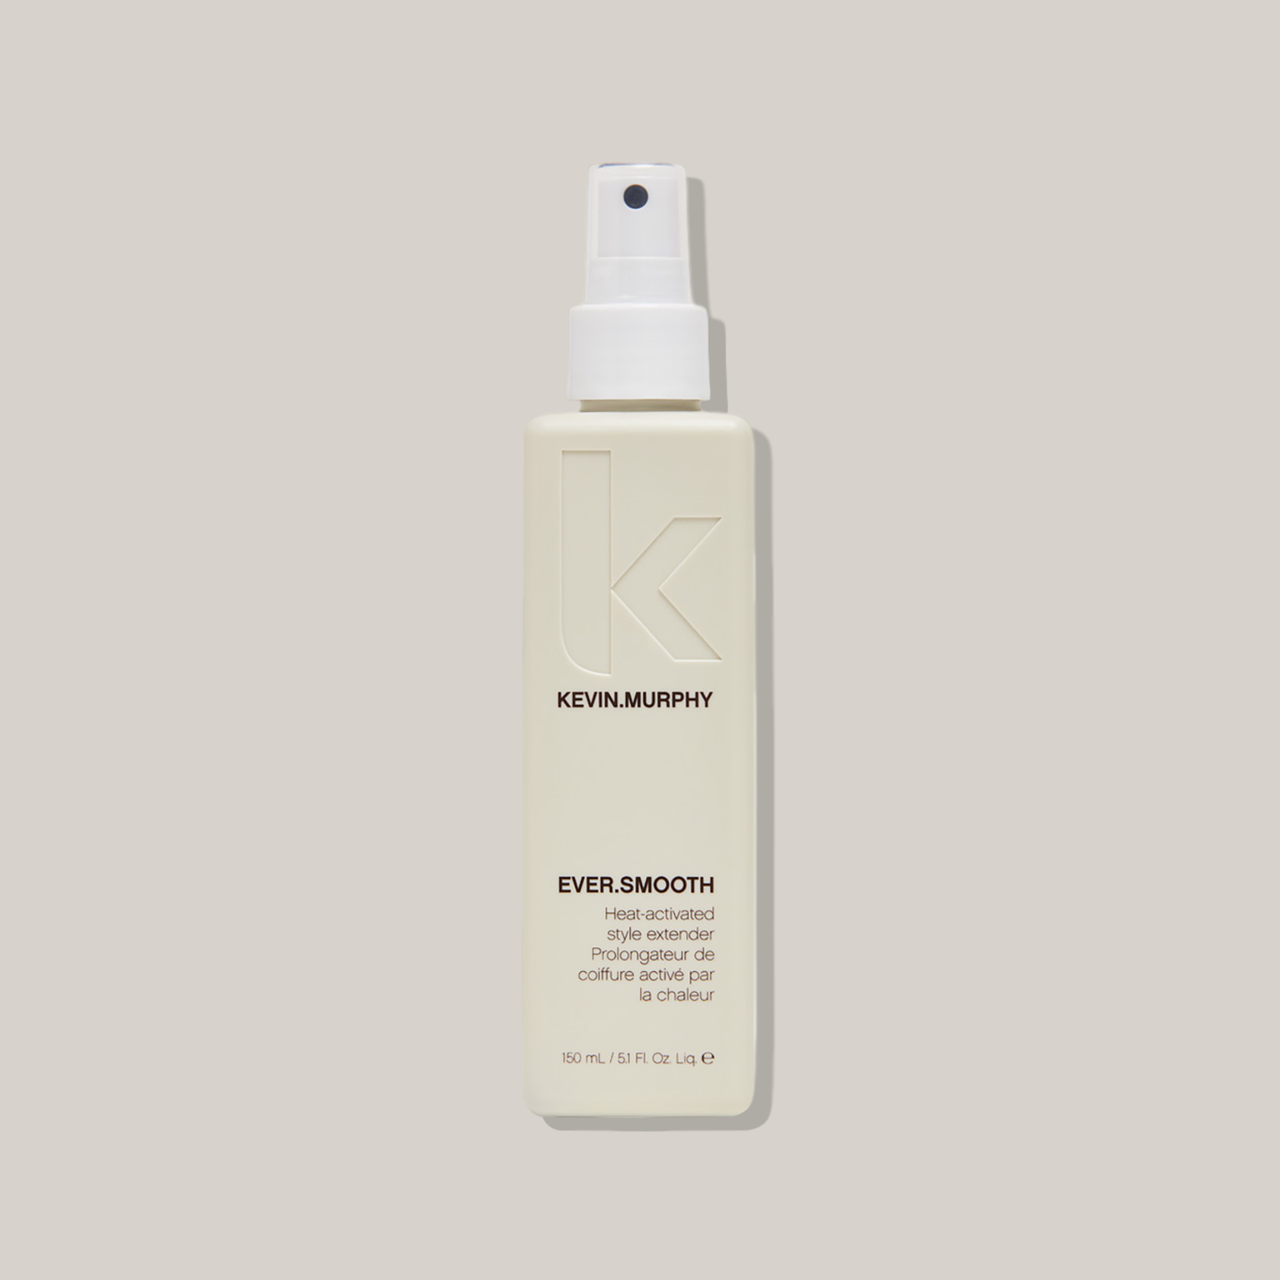 Kevin.murphy EVER.SMOOTH STYLE EXTENDER 